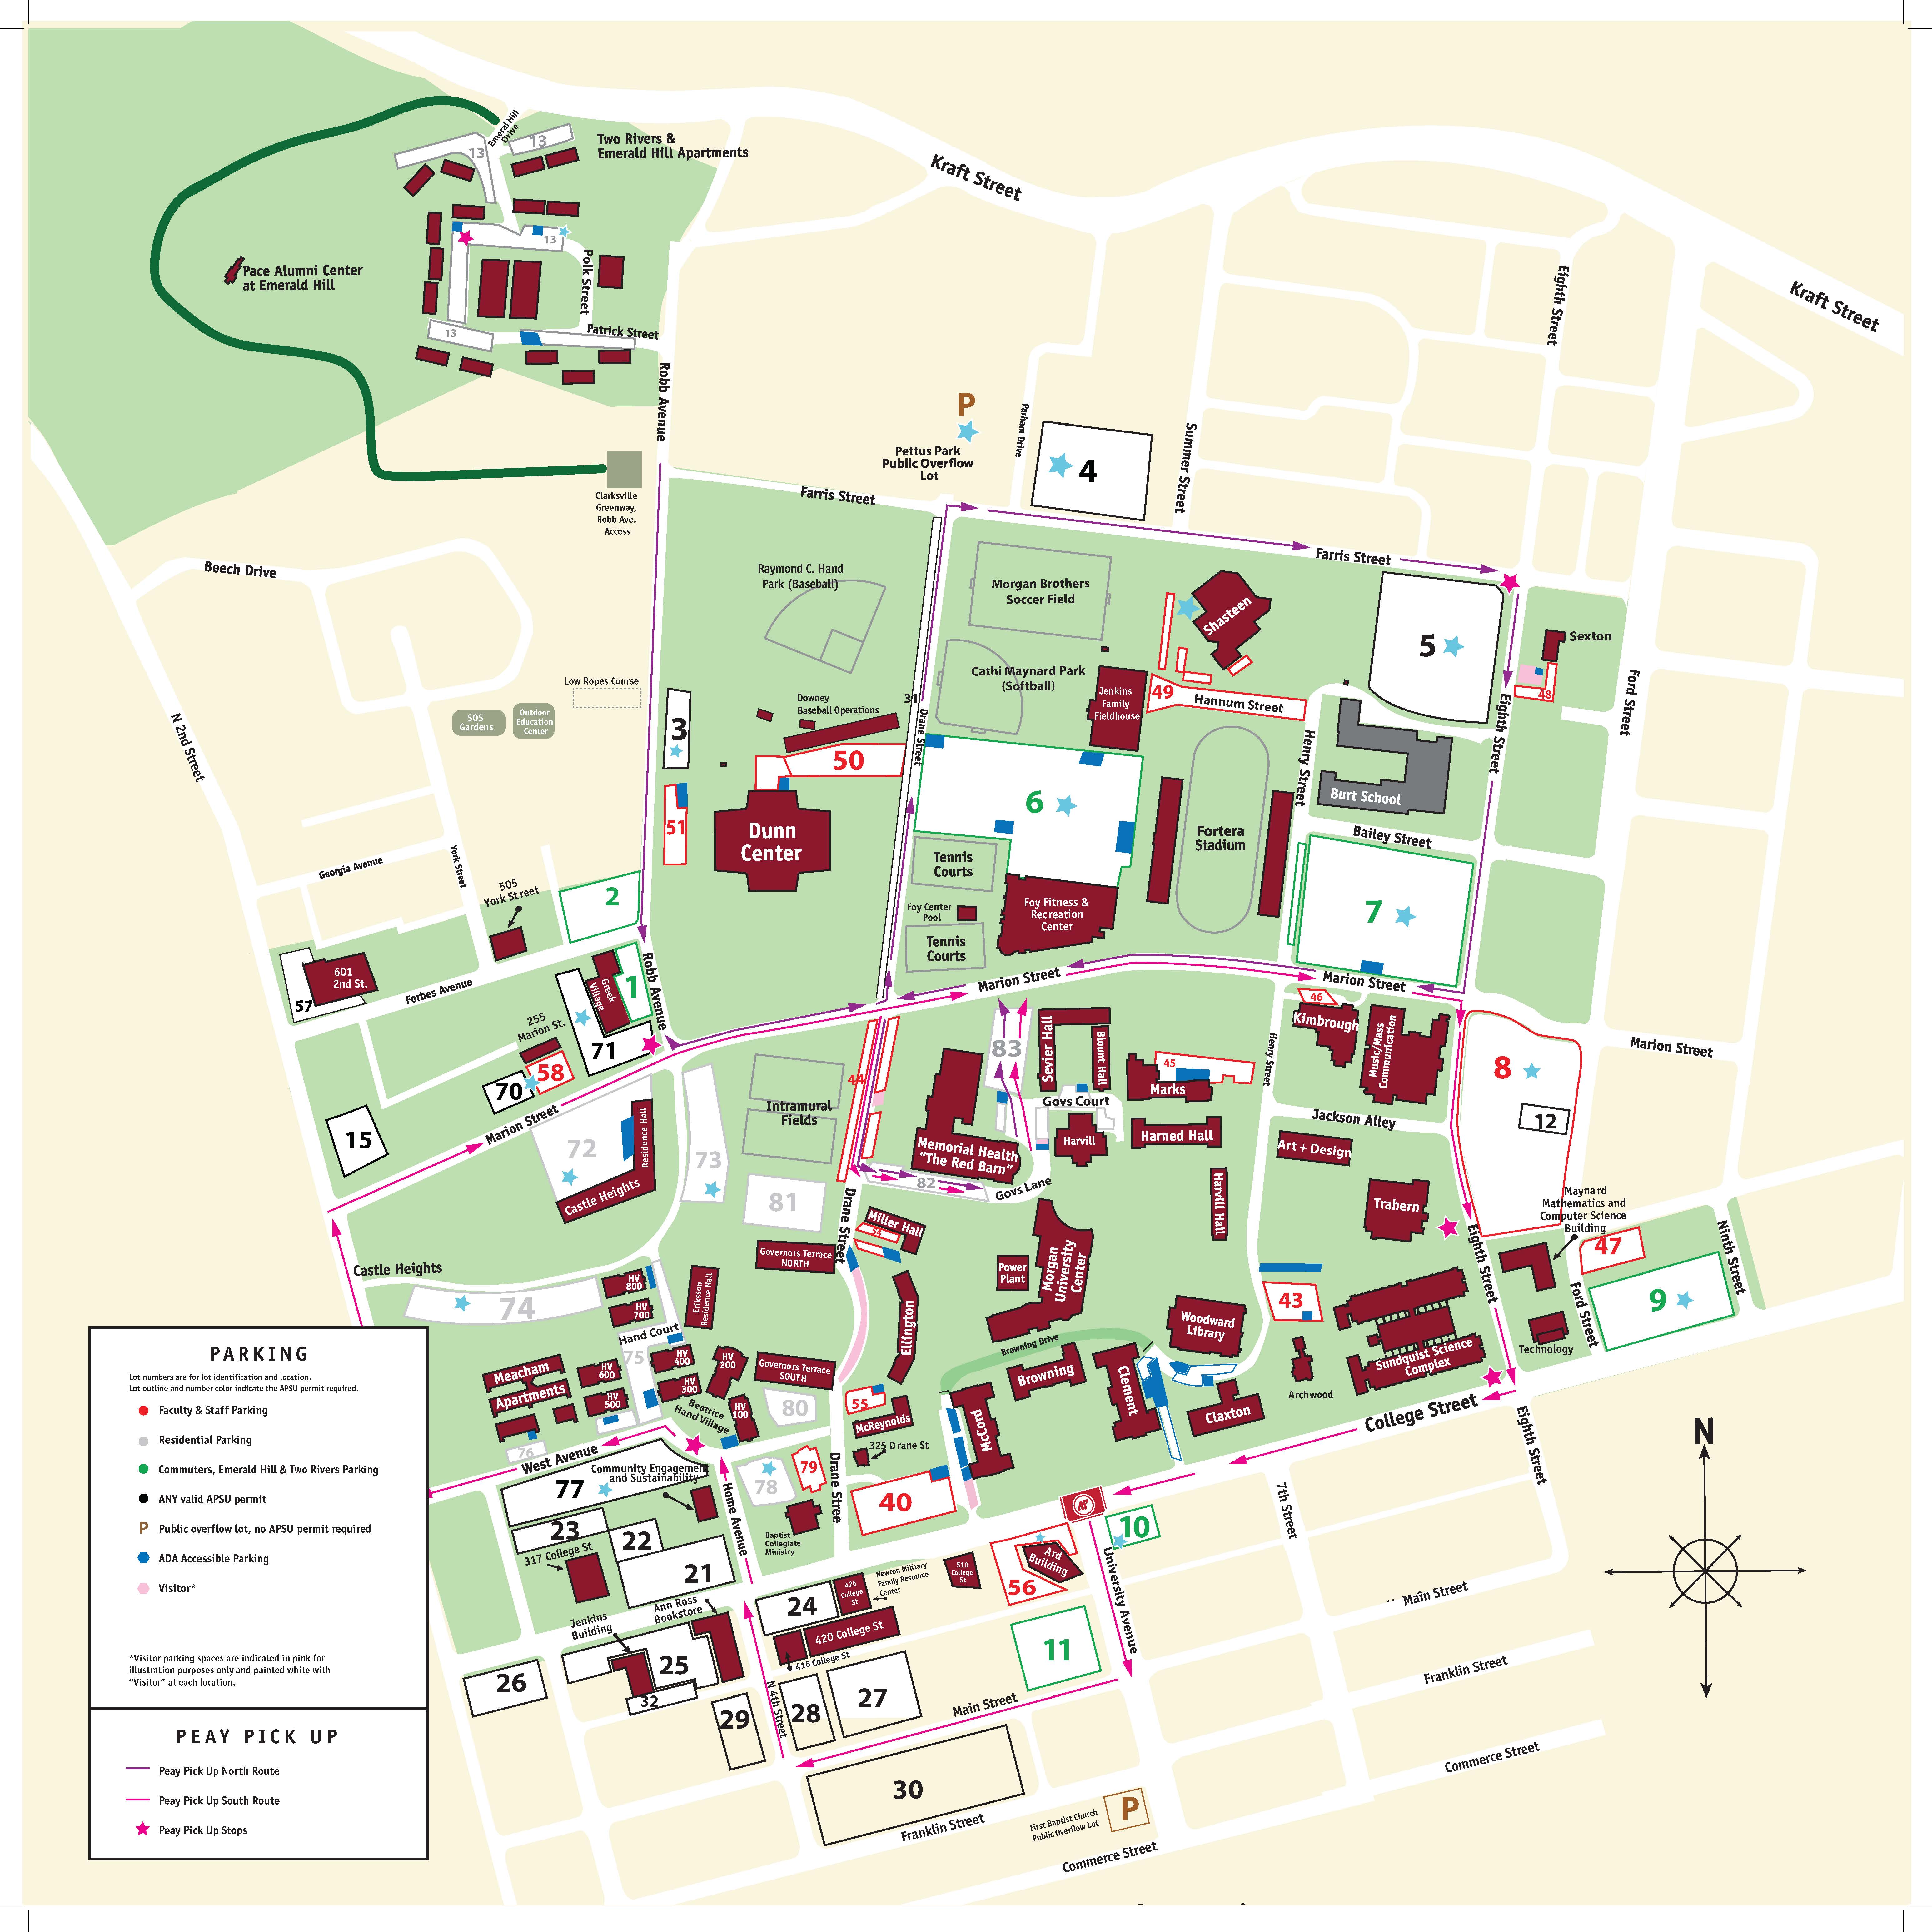 Parking and Peay Pick up route map